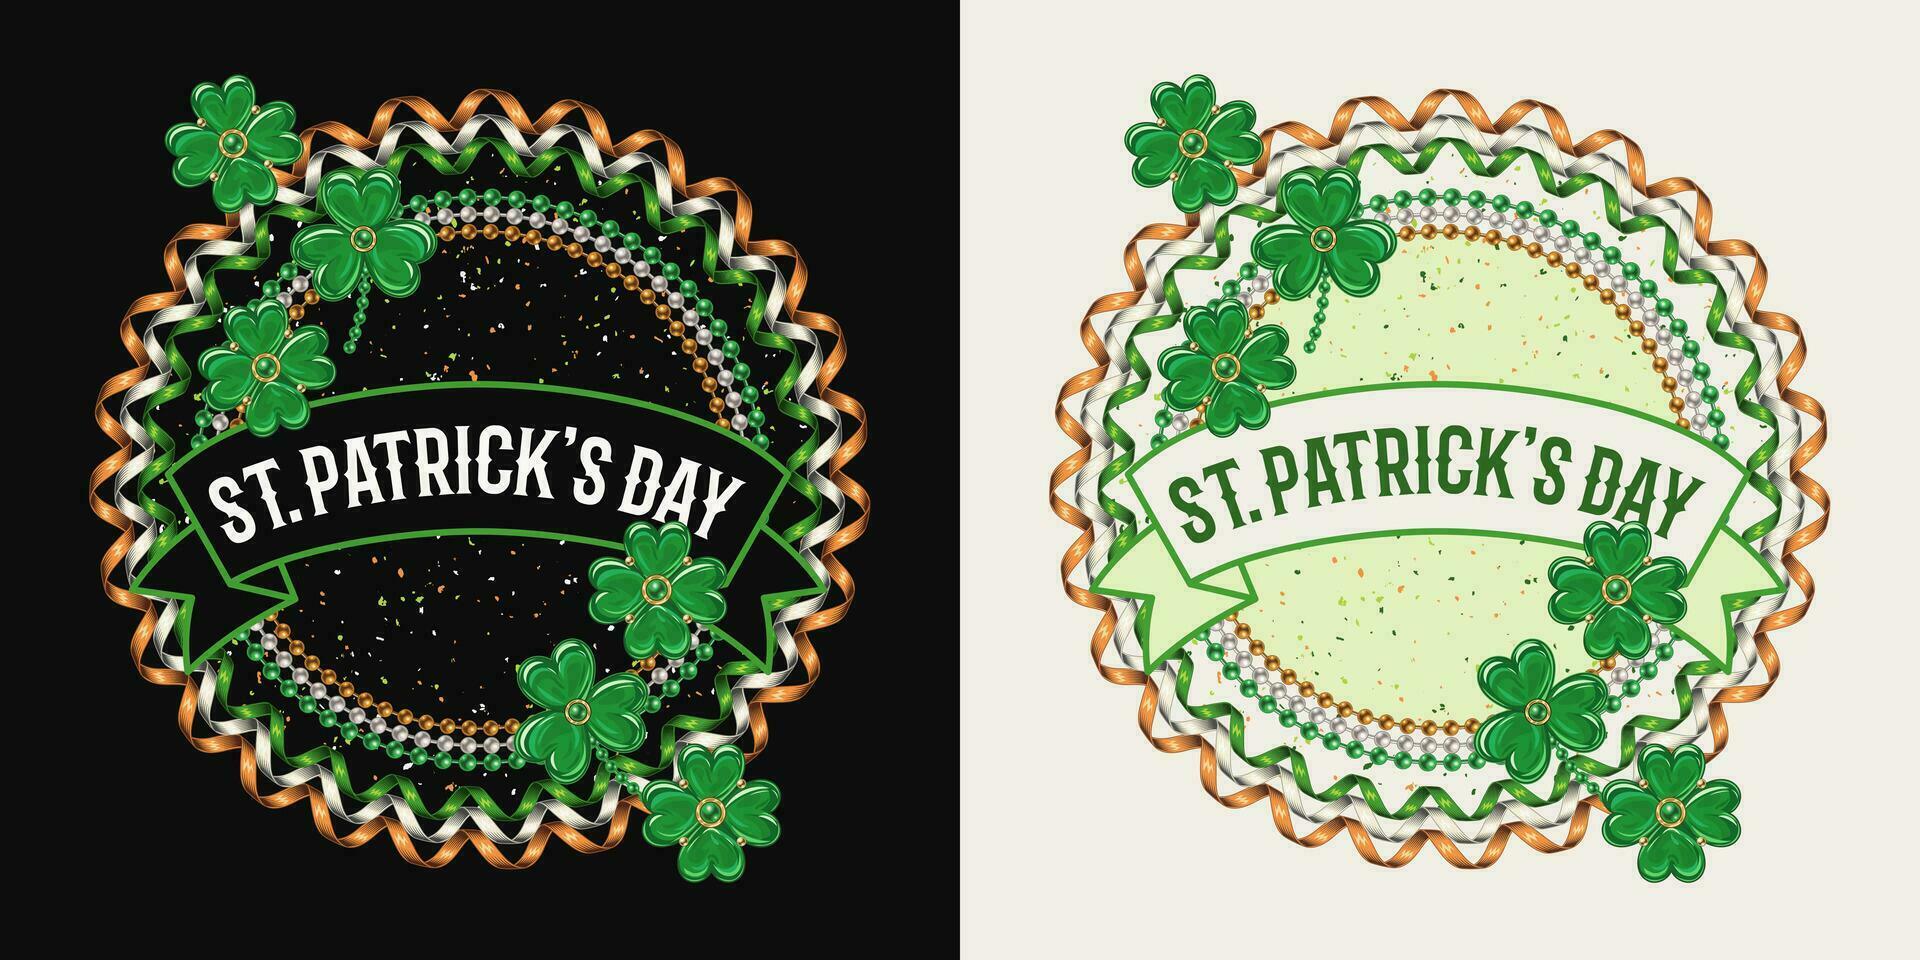 Circular label with bead strings, party streamer, clover, lucky shamrock leaves, ribbon with text. Vintage illustration for St Patrick. For prints, clothing, t shirt, holiday goods, stuff design. vector